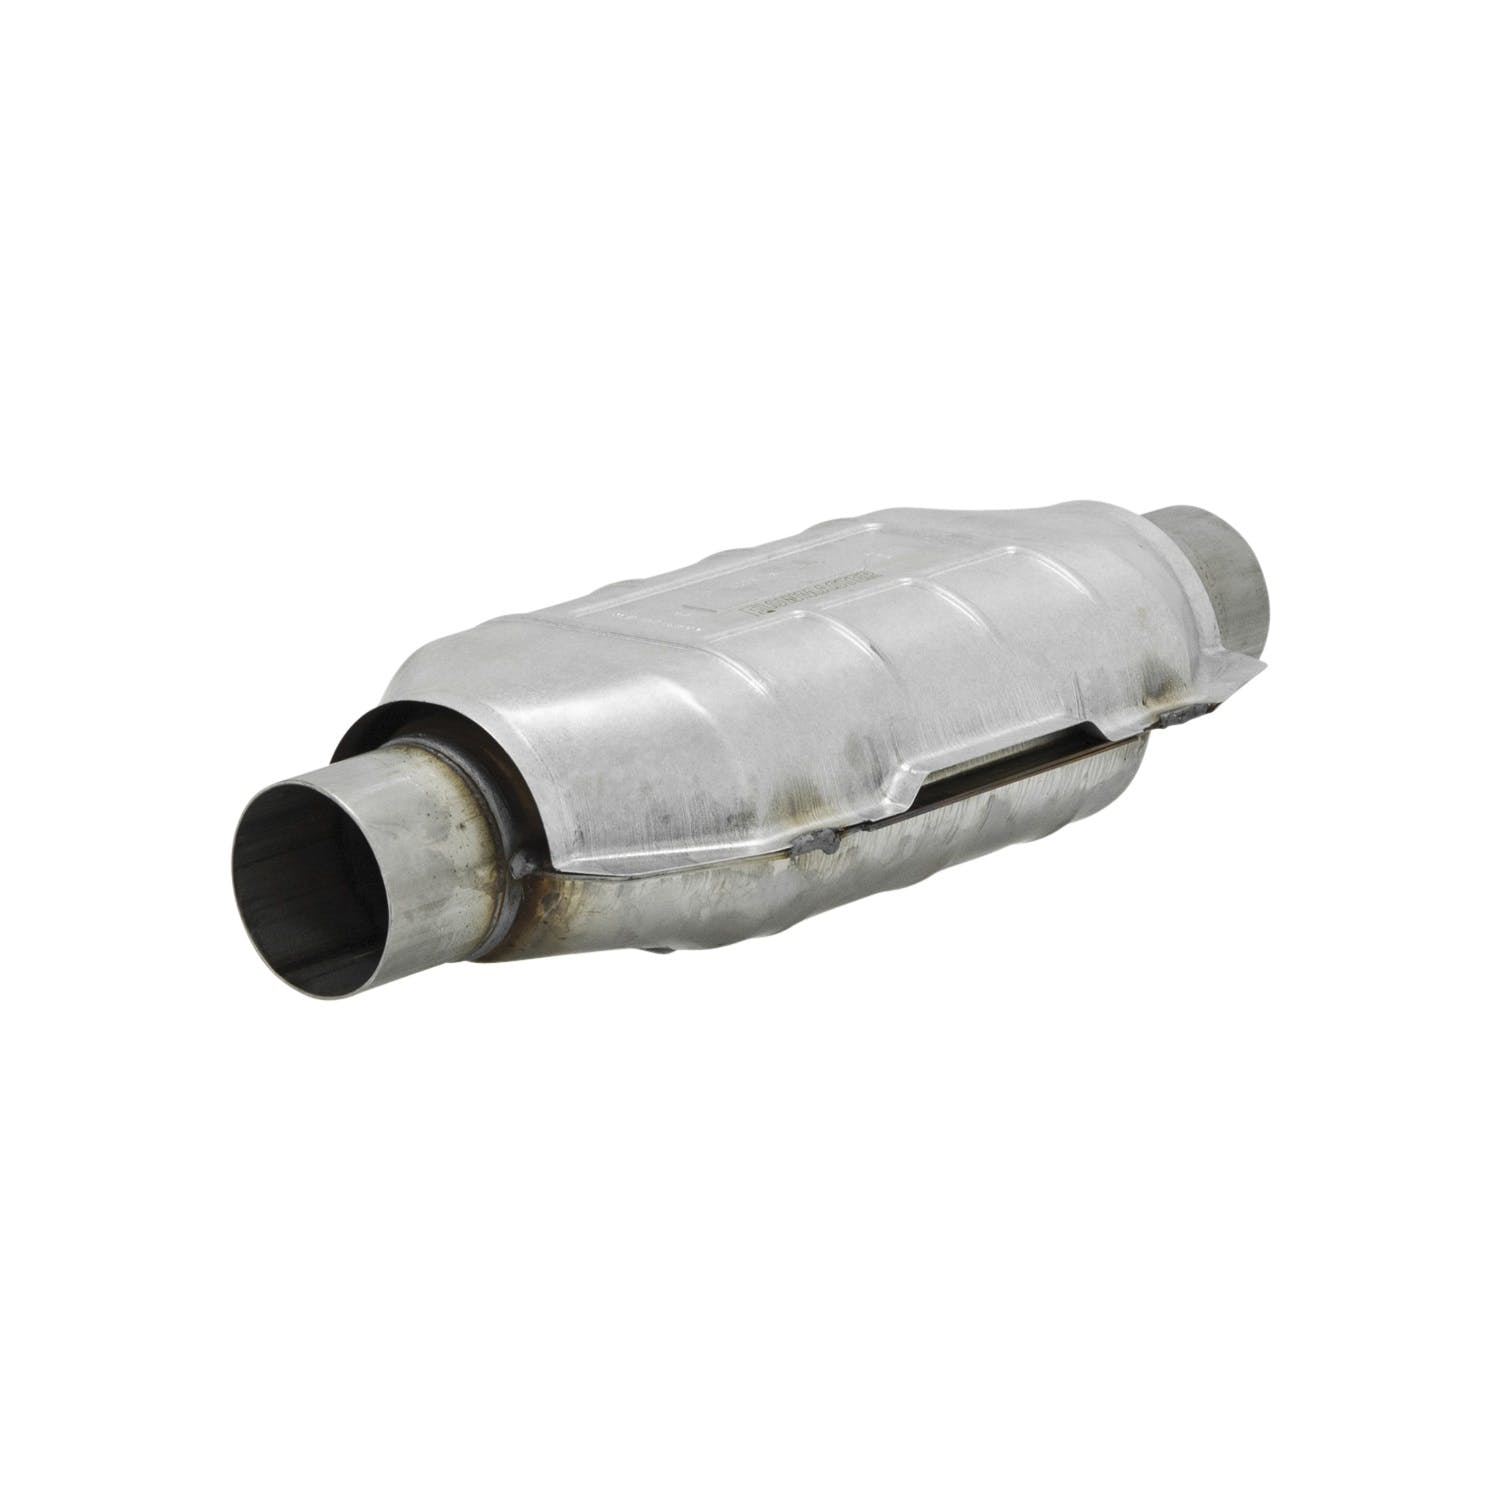 Flowmaster Catalytic Converters 2900230 Catalytic Converter-Universal-290 Series-3.00 in.-In/Out-49 State